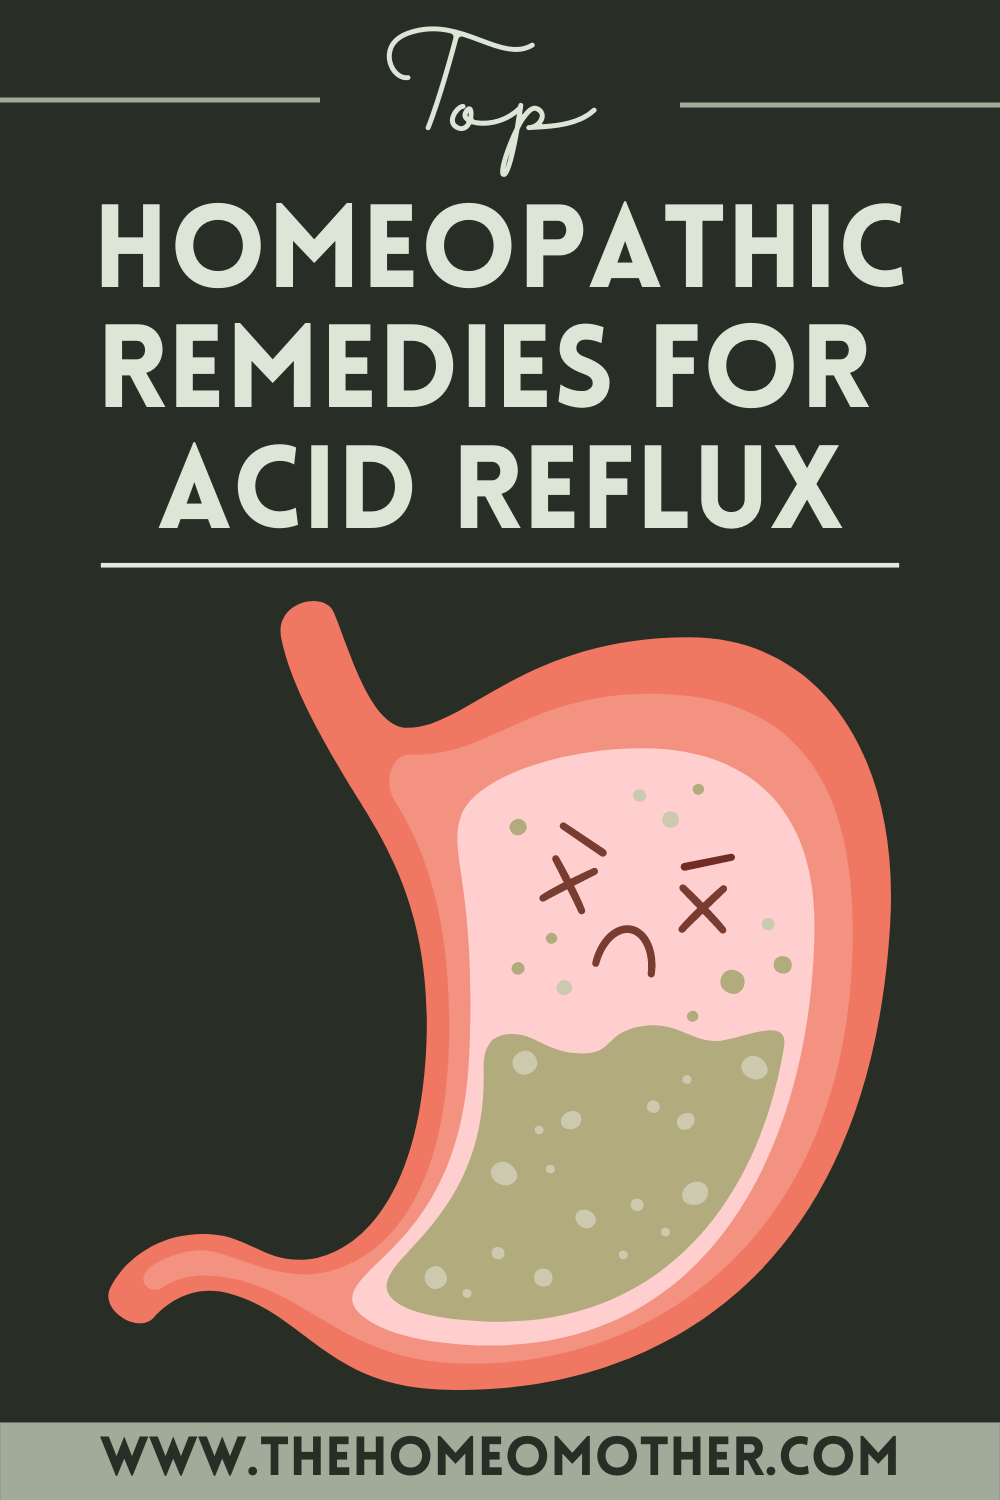 The Top 6 Best Homeopathic Remedies for Acid Reflux